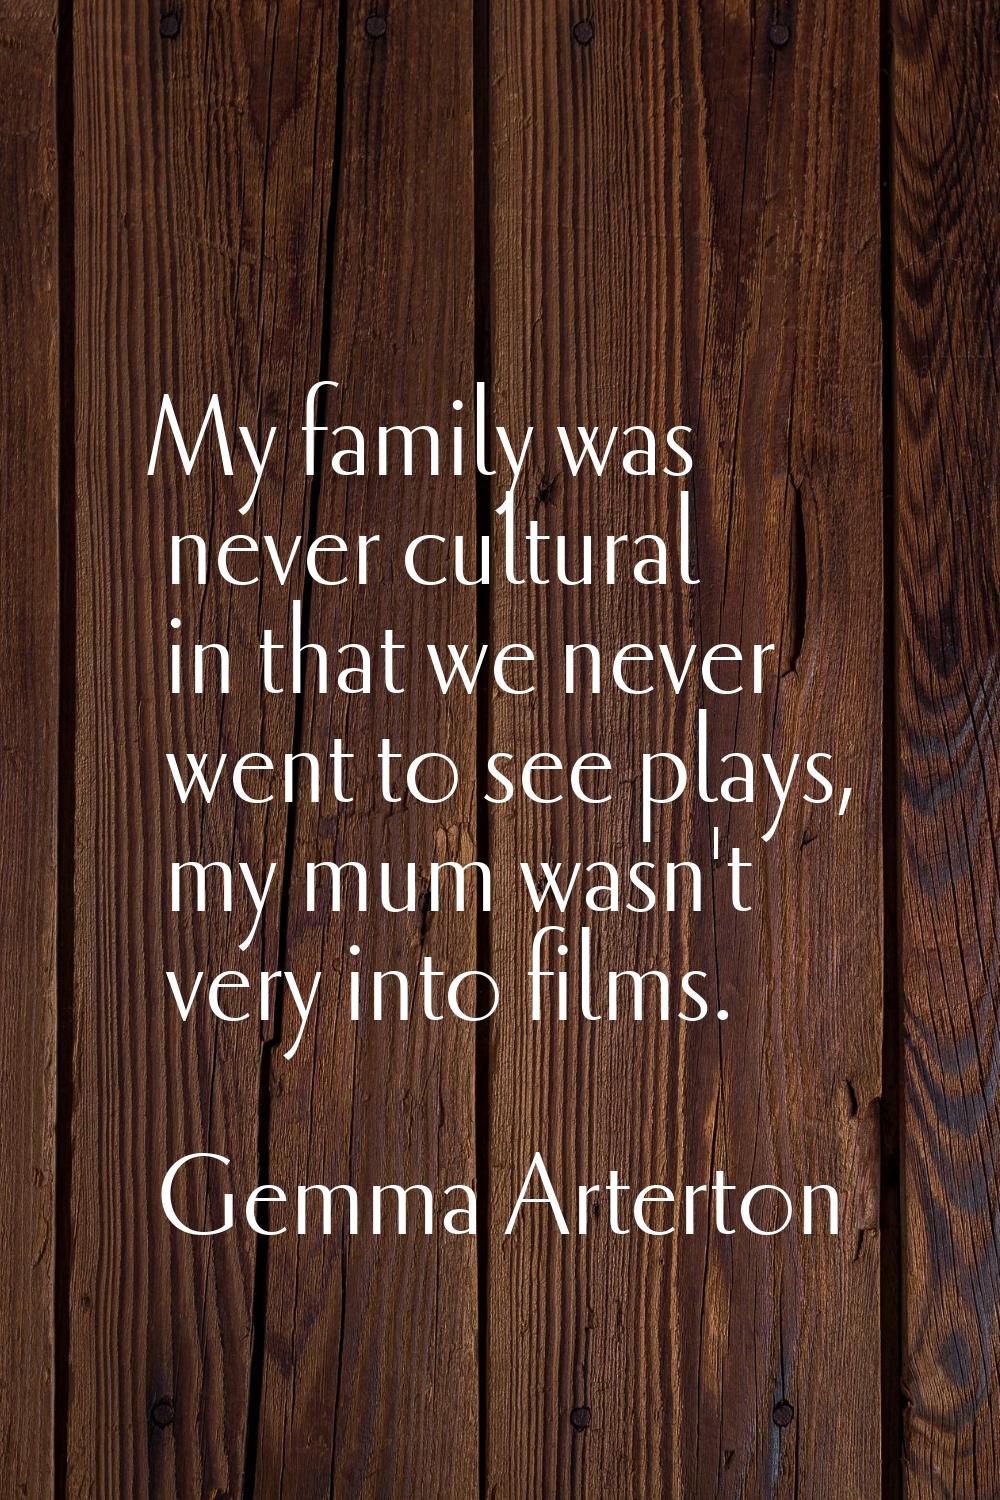 My family was never cultural in that we never went to see plays, my mum wasn't very into films.